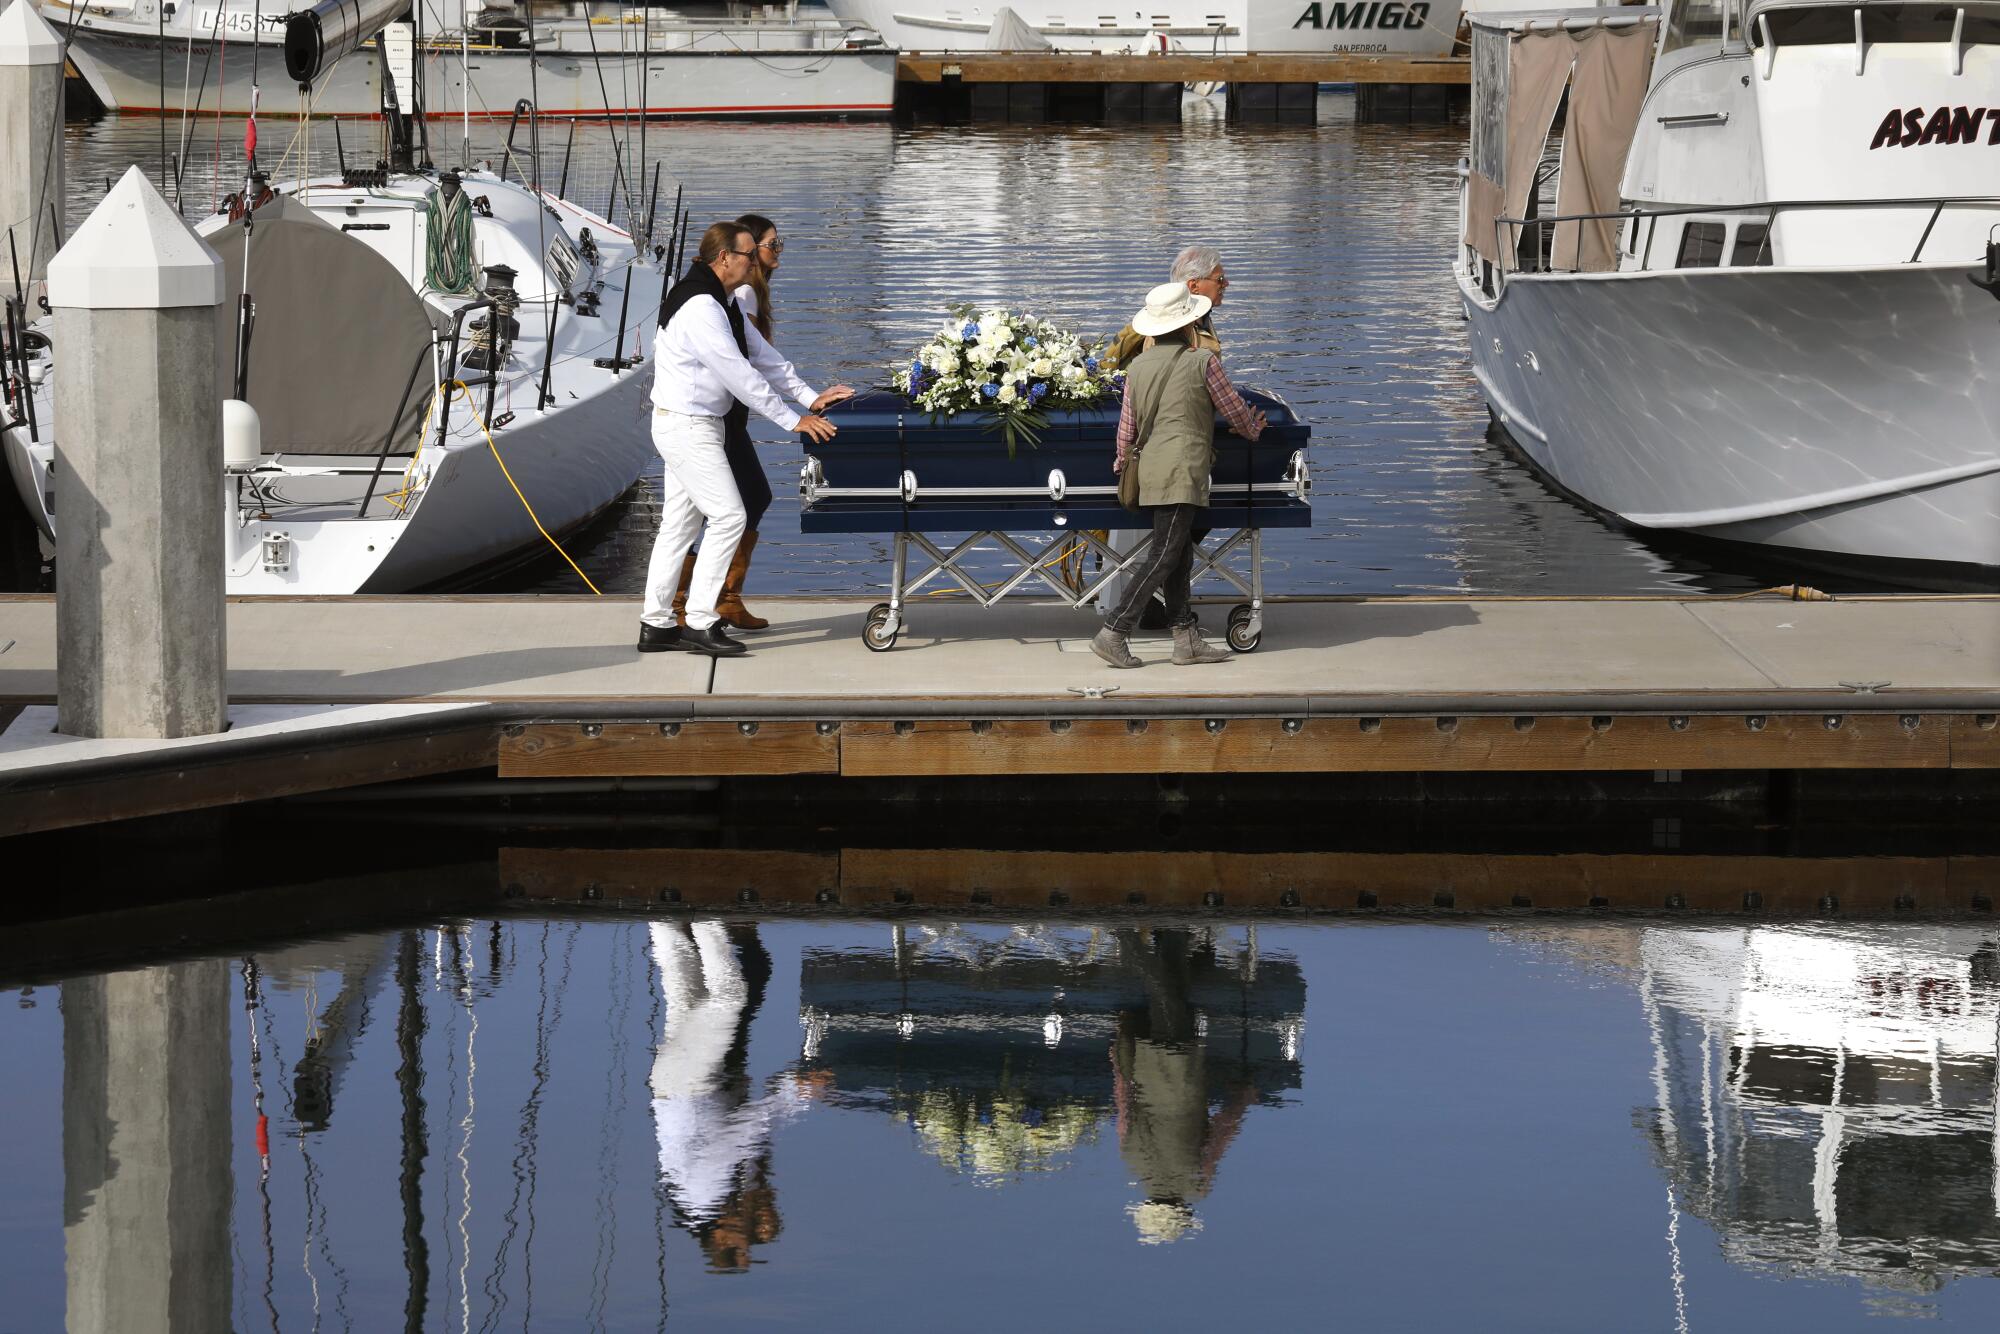 Diane Berol helps move the casket of her husband John Berol to the boat which will they him to his burial site at sea.